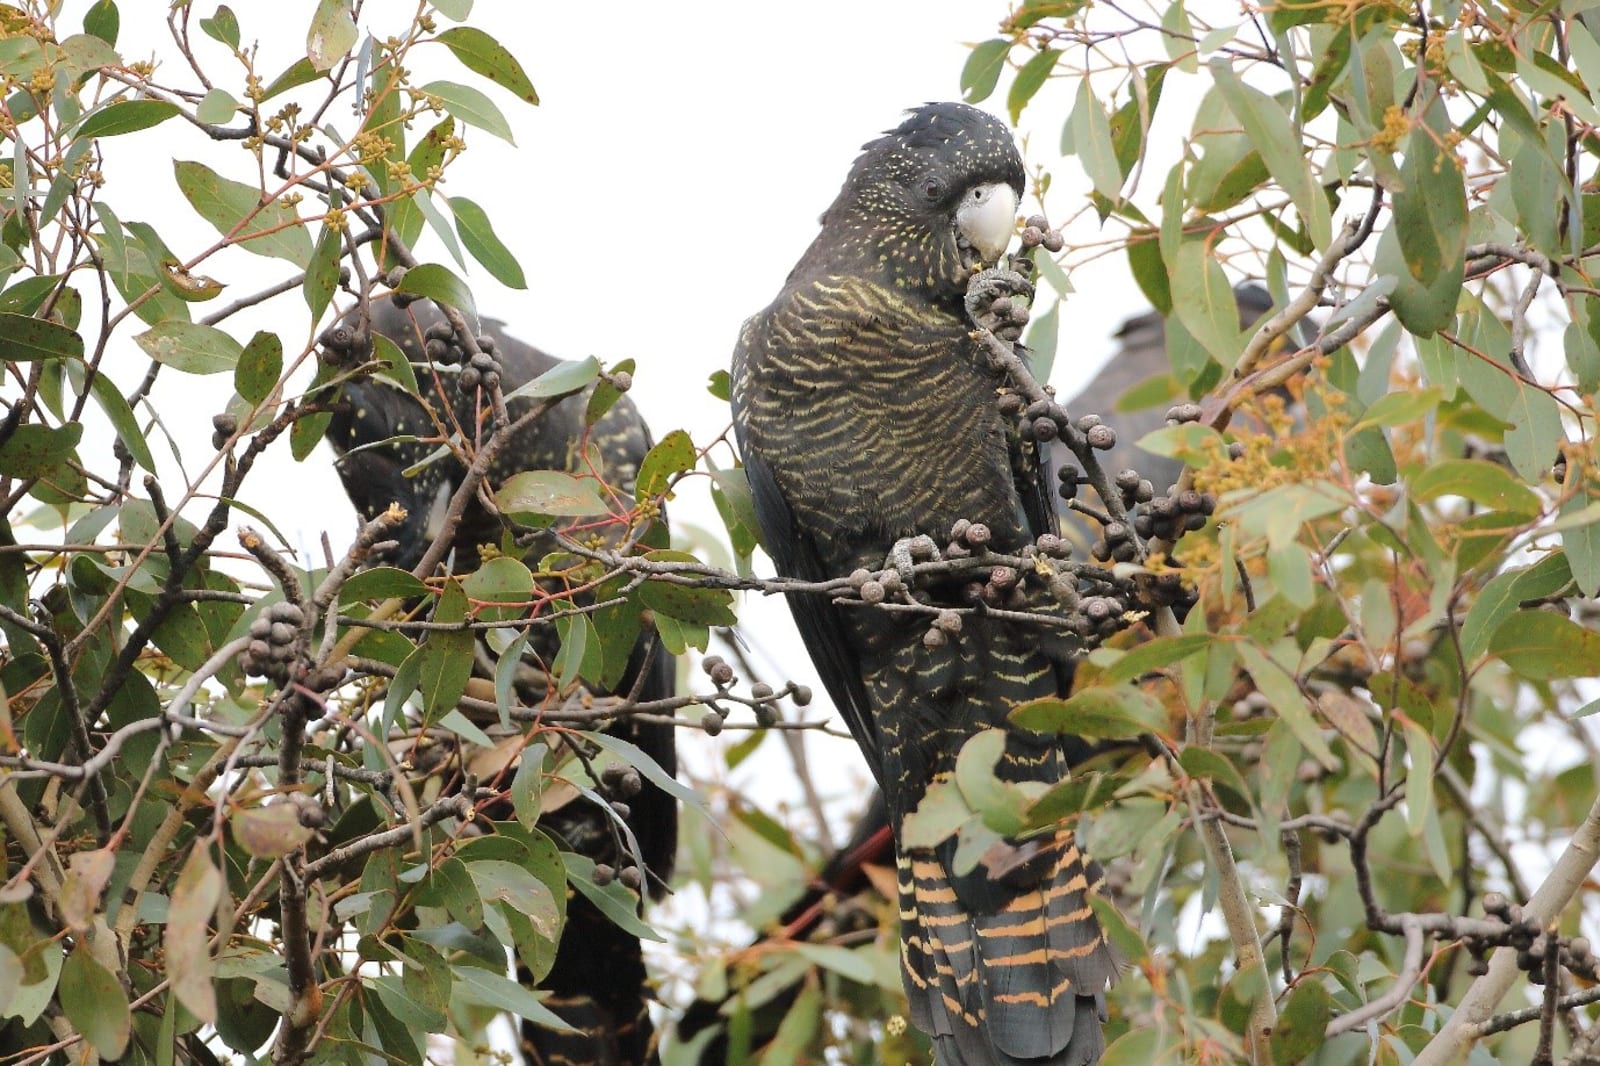 Female red-tailed black cockatoos in a tree